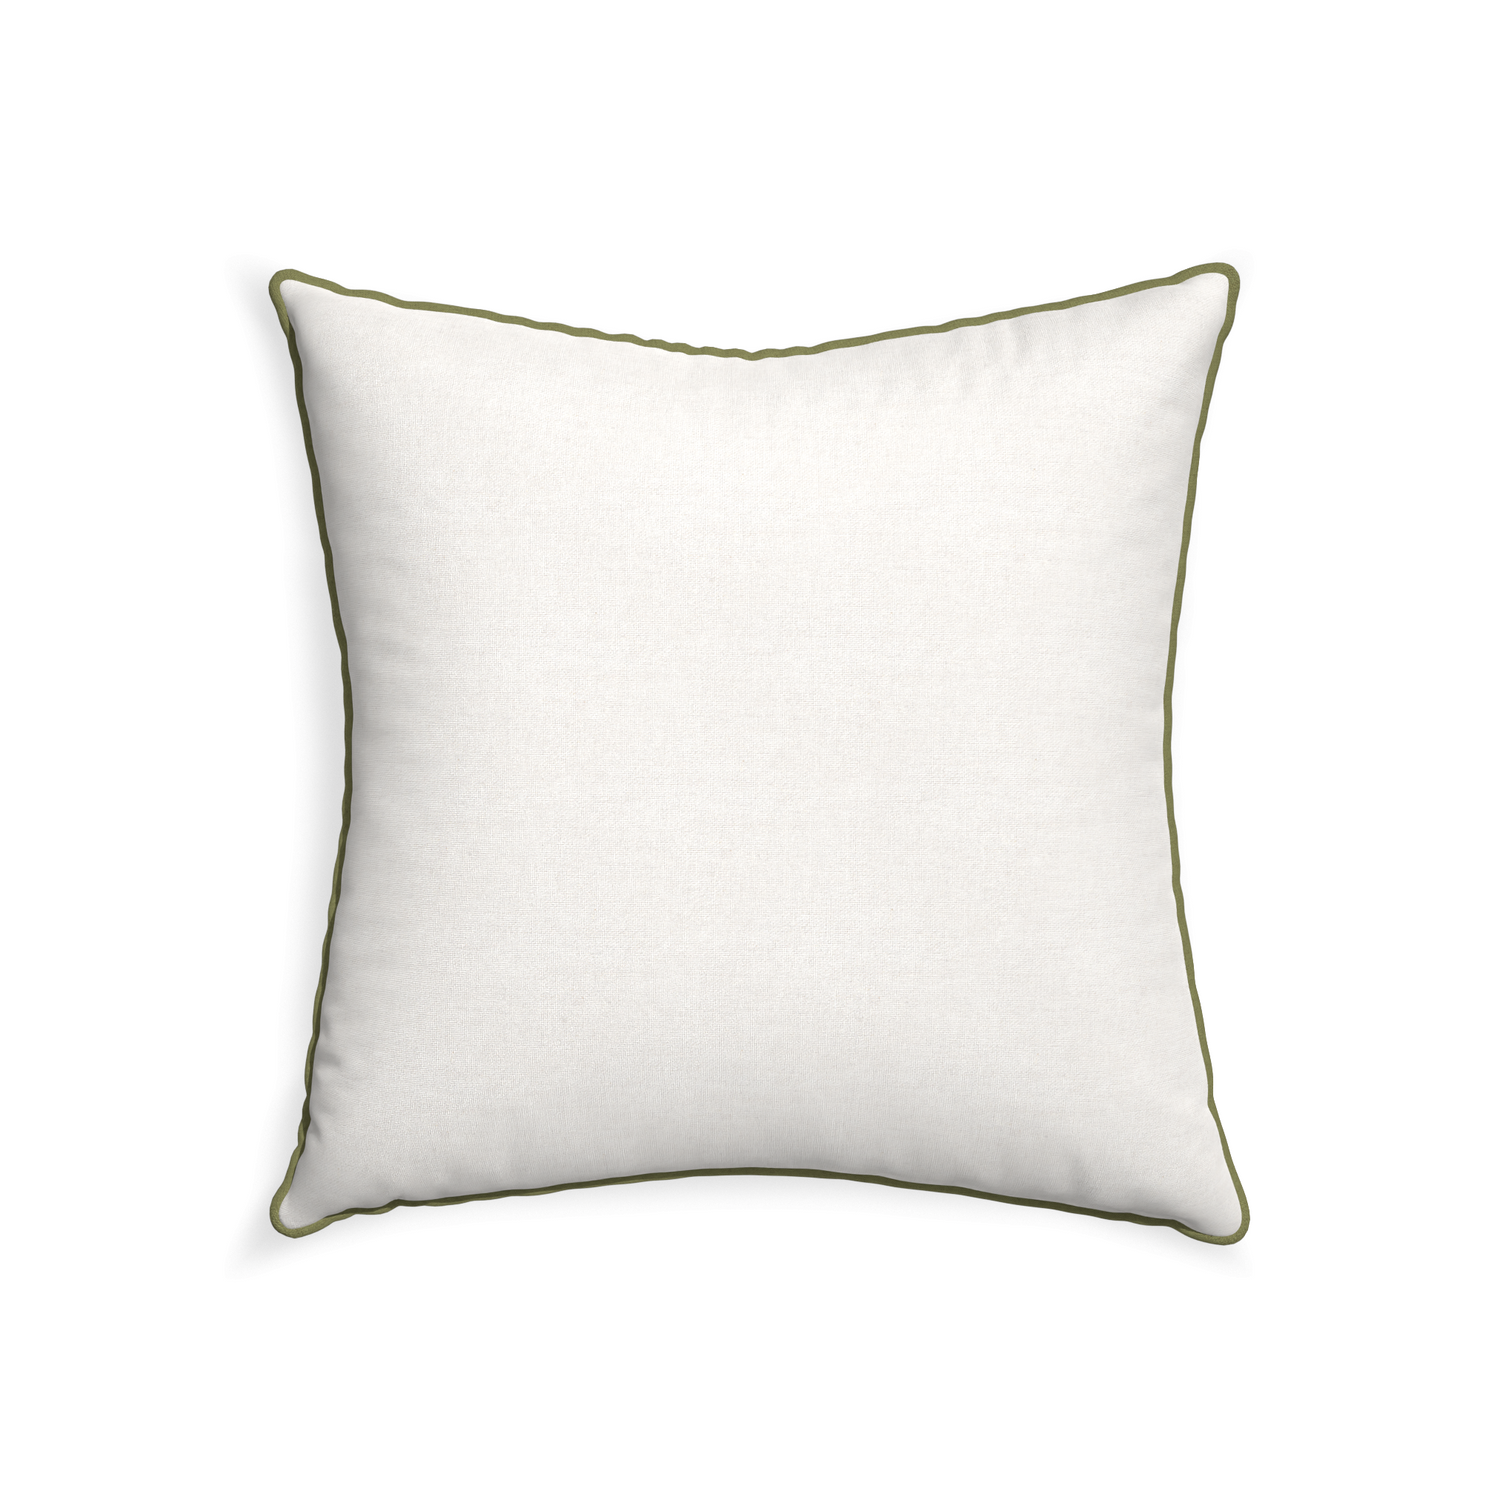 22-square flour custom pillow with moss piping on white background